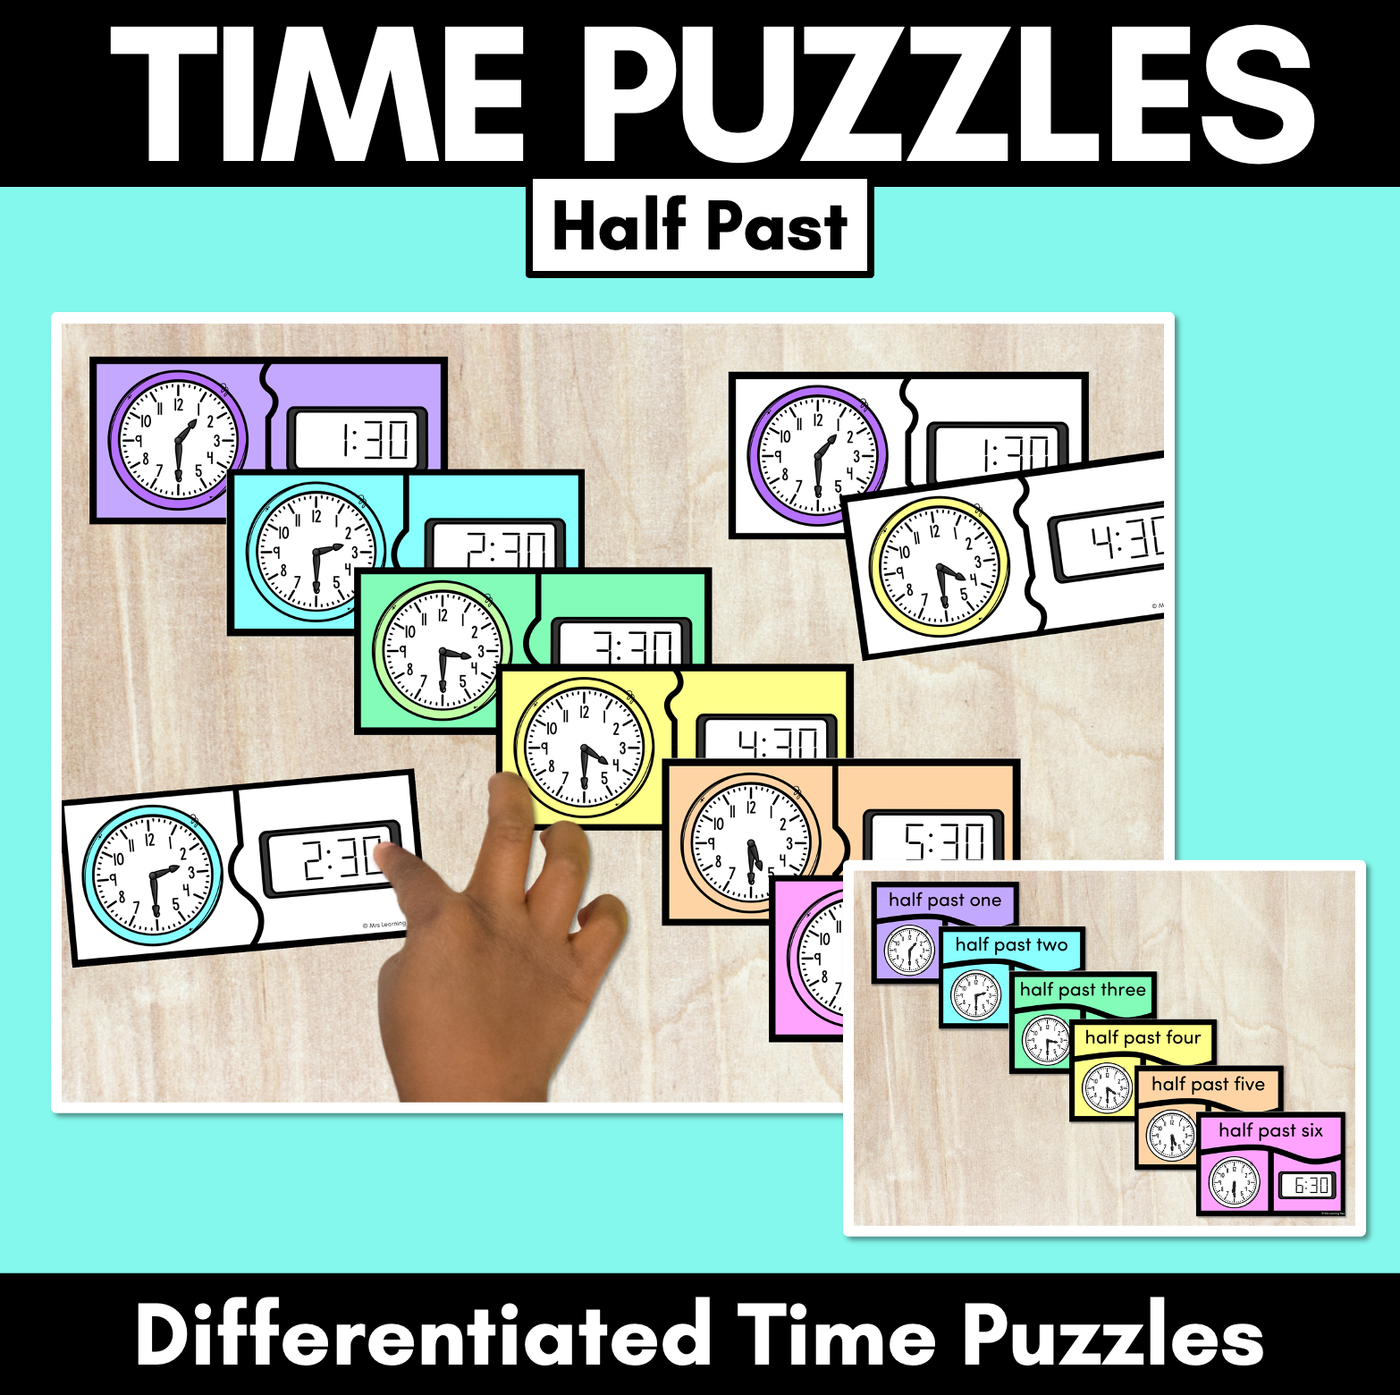 TIME PUZZLES - Half Past - Digital and Analog Time